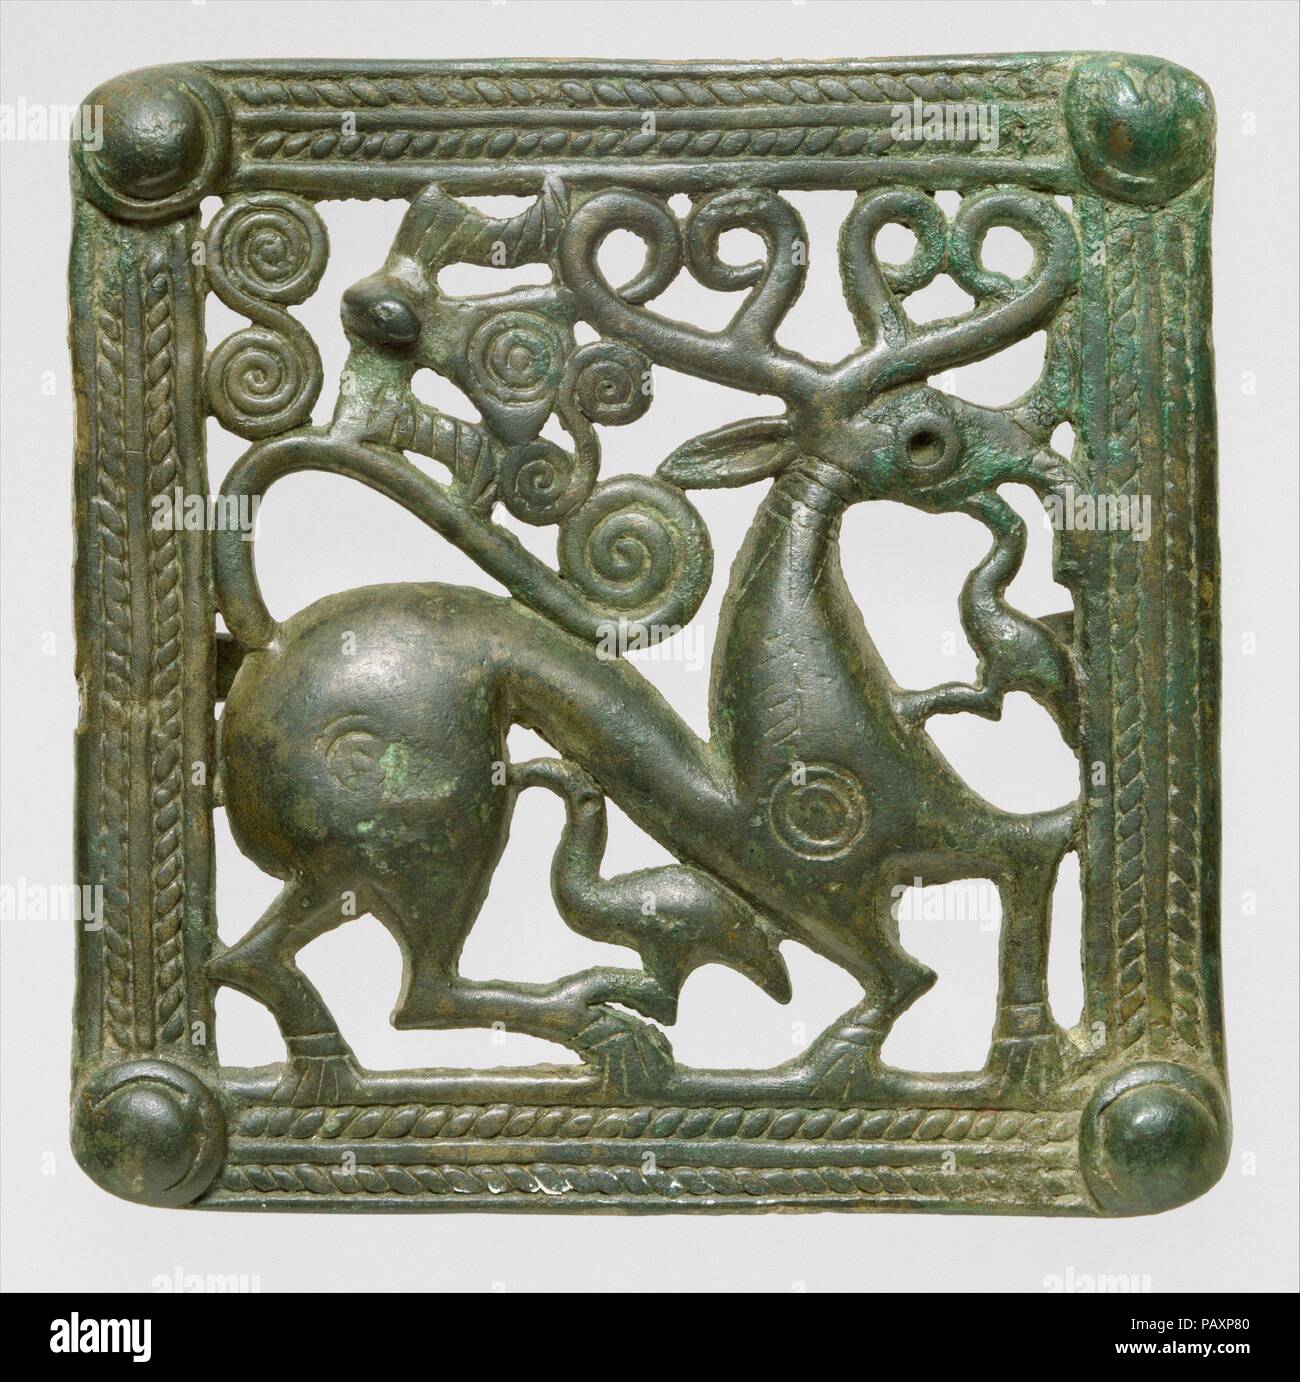 Belt clasp. Dimensions: H. 11.4 cm, W. 11.4 cm. Date: ca. A.D. 1st-2nd century.  In the late second millennium B.C., the tradition of lively animal-ornamented bronzes begins in the Caucasus region. Stylized animals with small waists, arched necks and backs are seen on numerous bronze tools including axes and pins, and are found in Georgia, Armenia, Azerbaijan, and the Northern Caucasus by the beginning of the Late Bronze and Early Iron ages.  Cast-bronze belt clasps similar to this one have been excavated in the Republic of Georgia and are a distinctive product of that region in the first few  Stock Photo